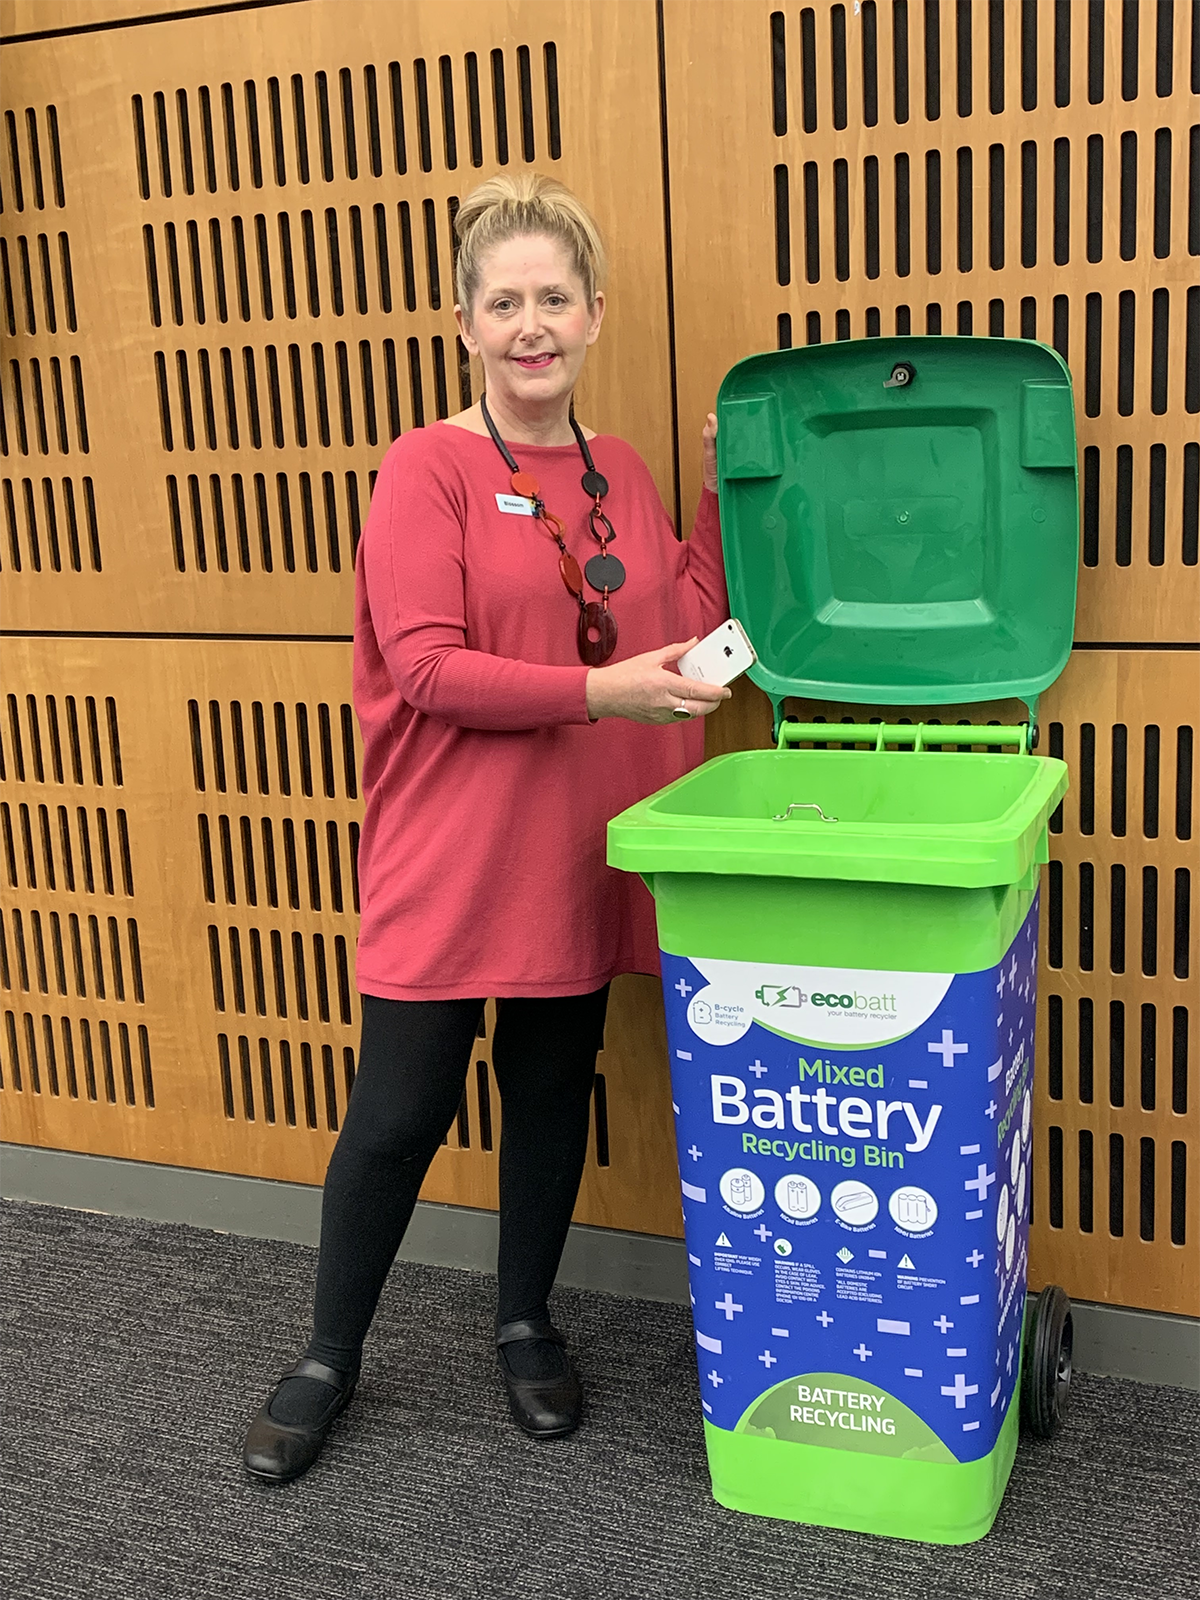 Woman placing an old mobile phone into a green battery and mobile phone recycling bin.